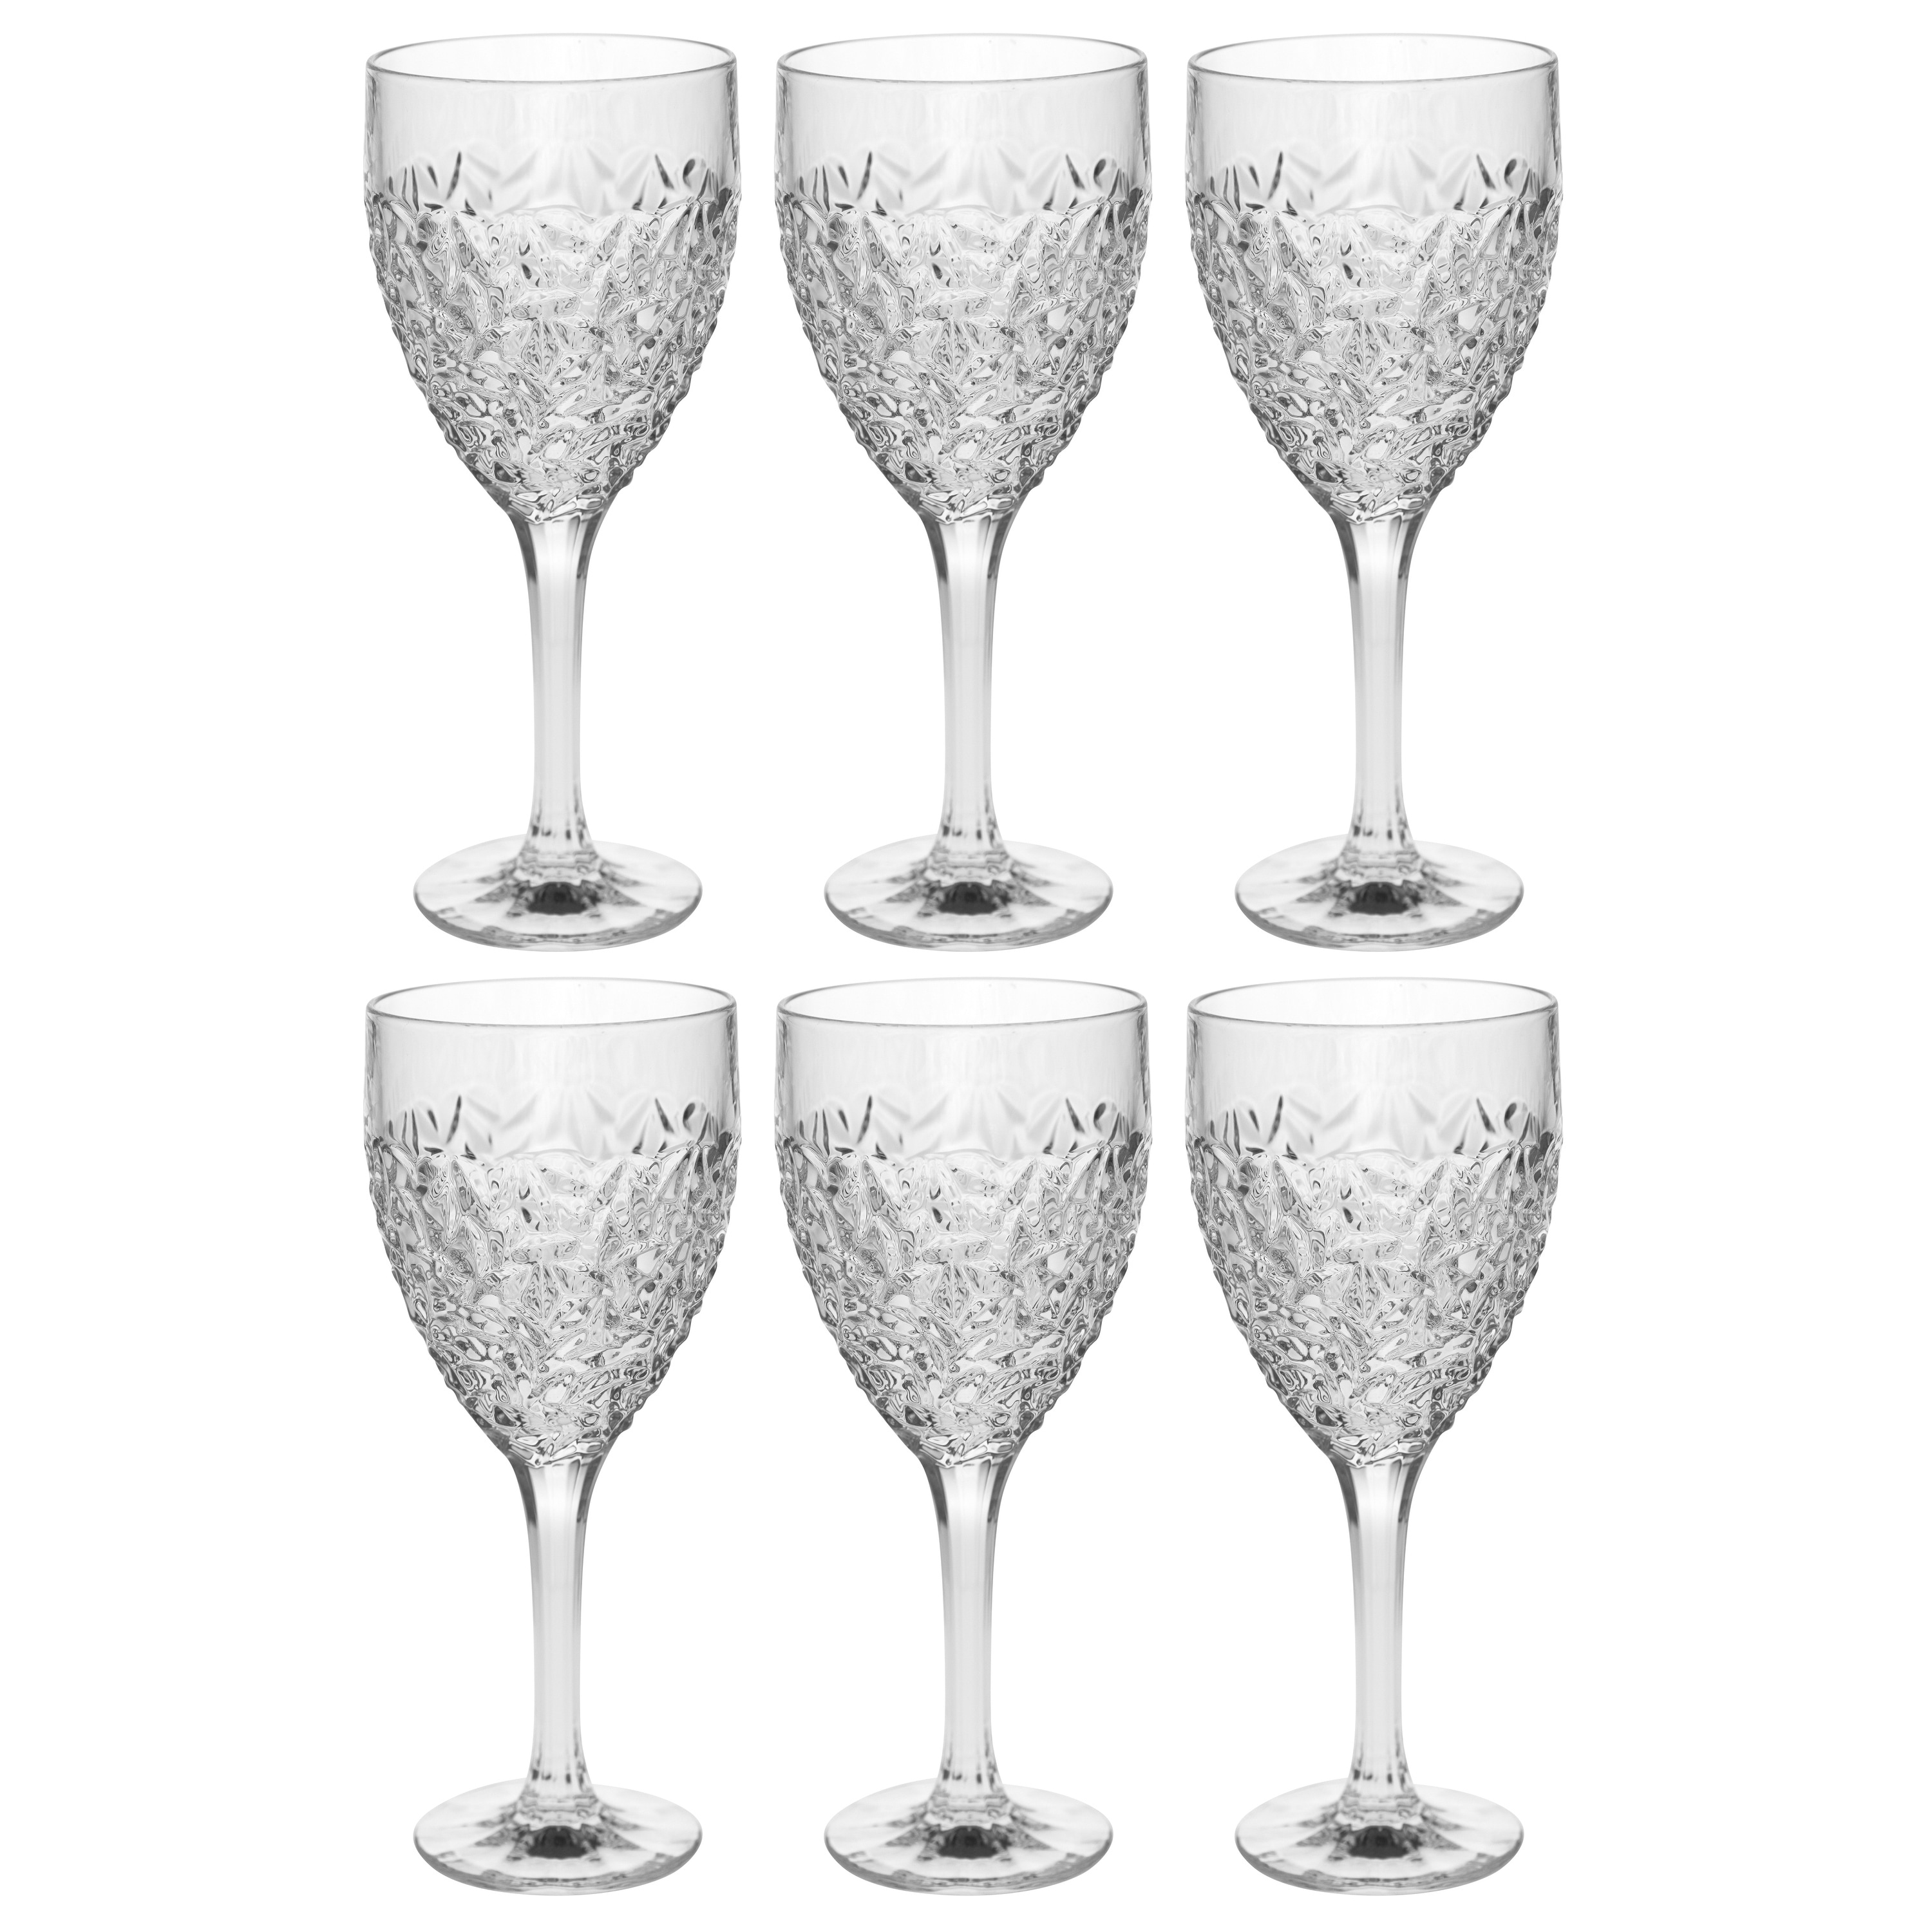 Frosted 17oz Stemless Wine Glass